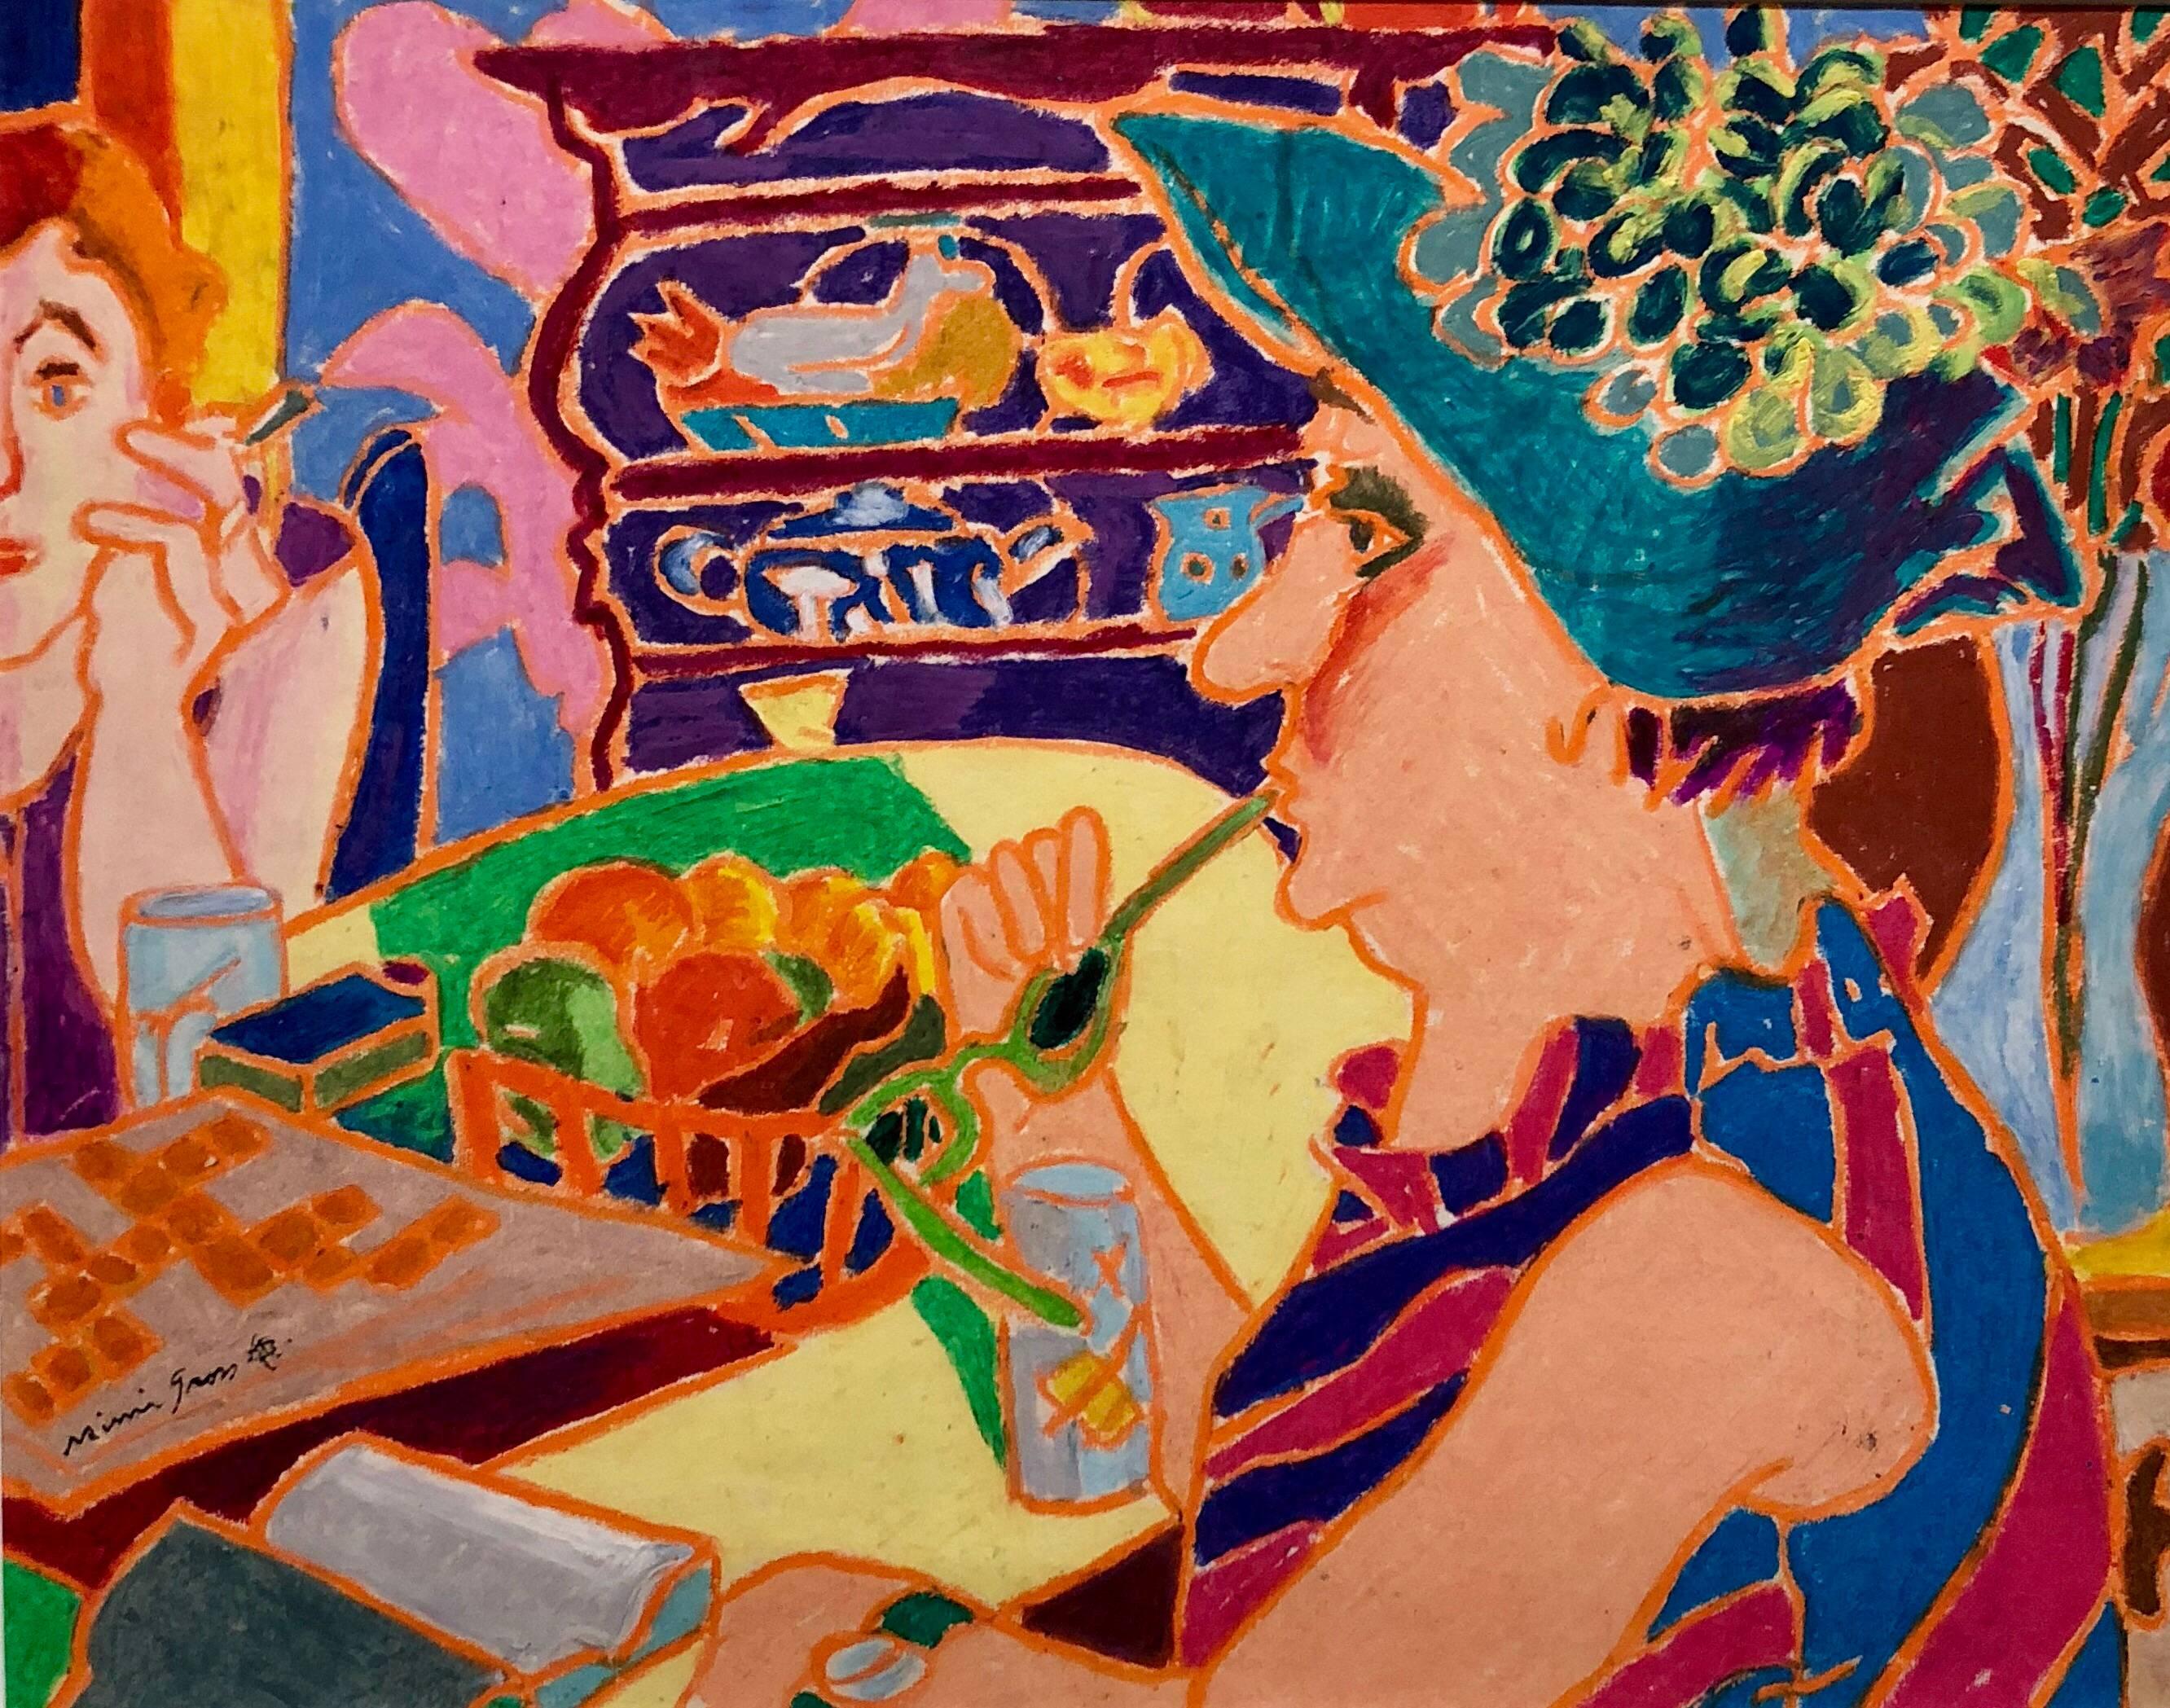 Mimi Gross Interior Art - Vibrant Colorful Drawing in Oil Pastel Women in Cafe